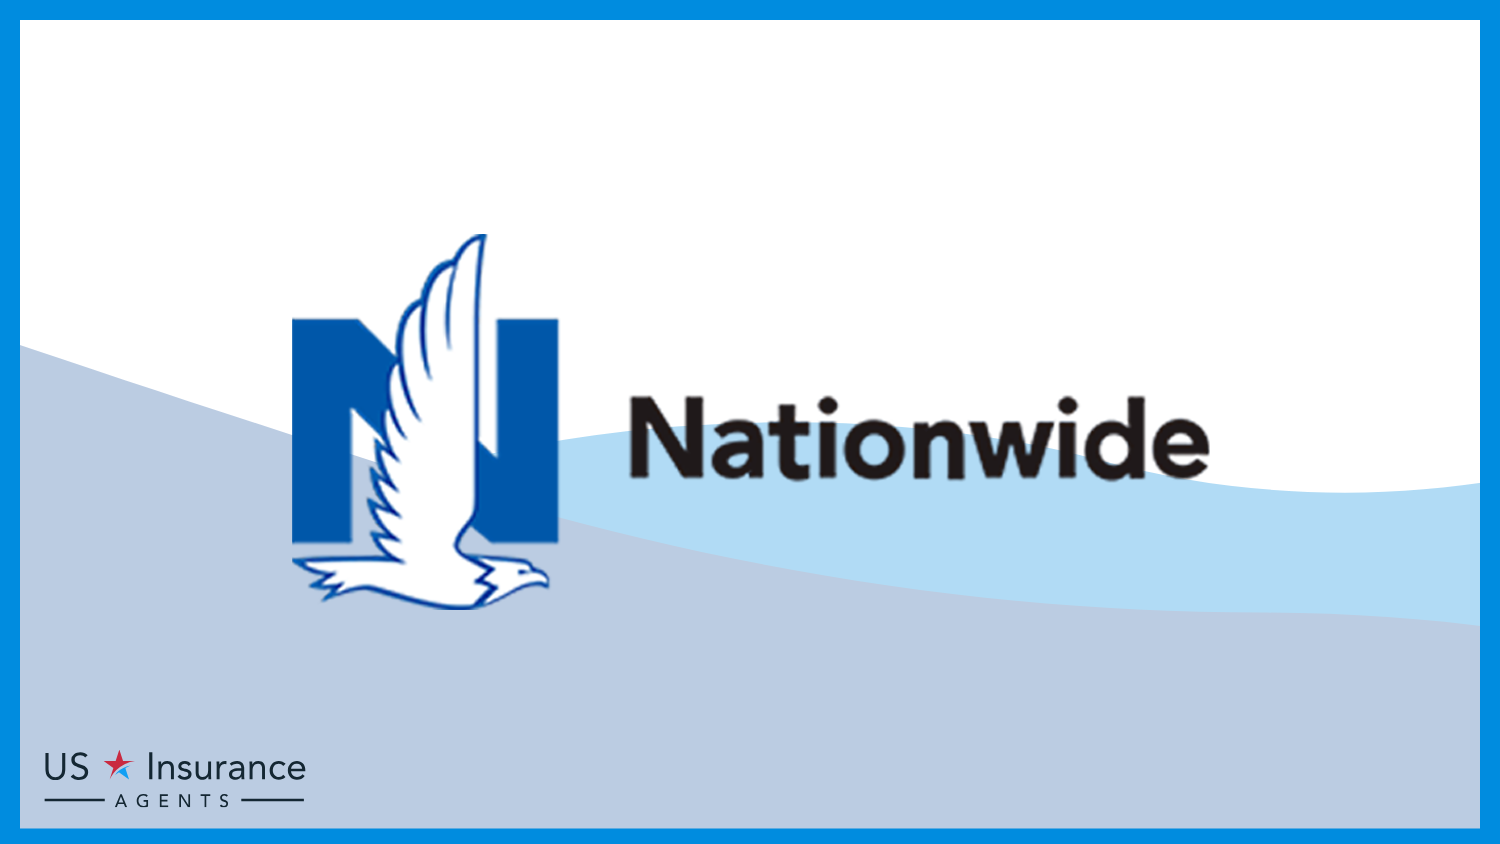 Nationwide: Best Business Insurance for Health Insurance Companies